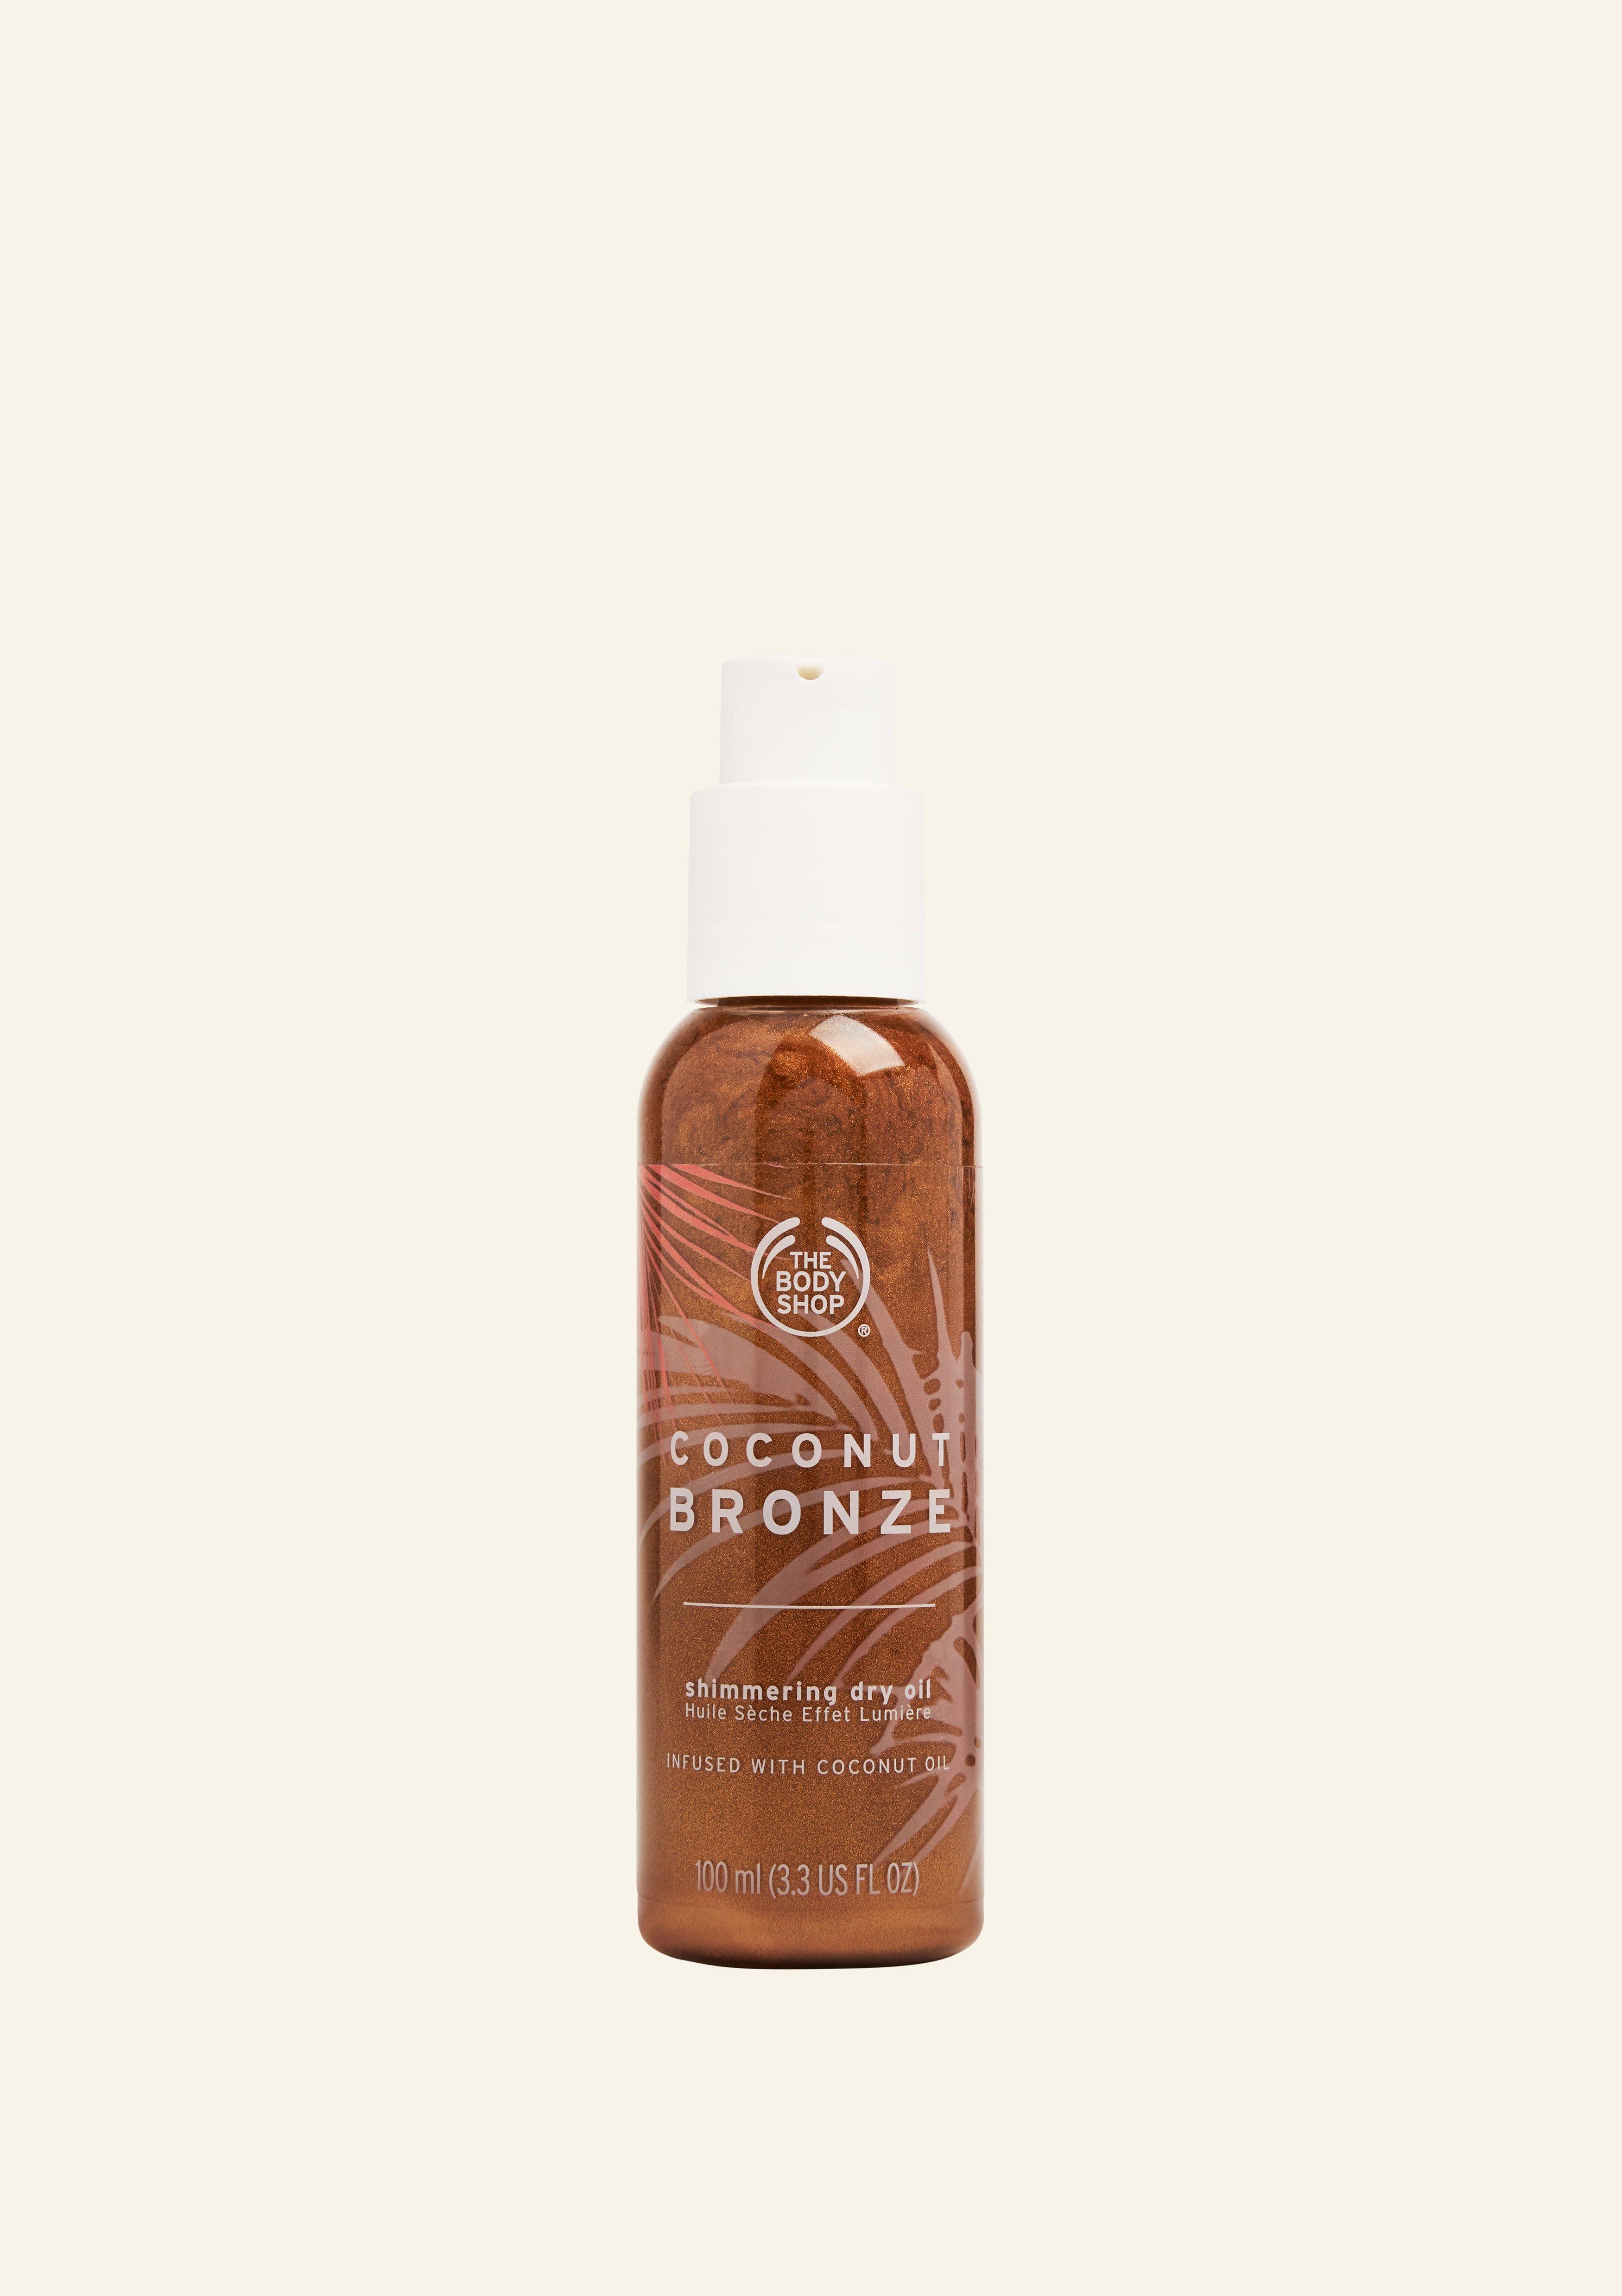 Shop Our Shimmering Body Oil